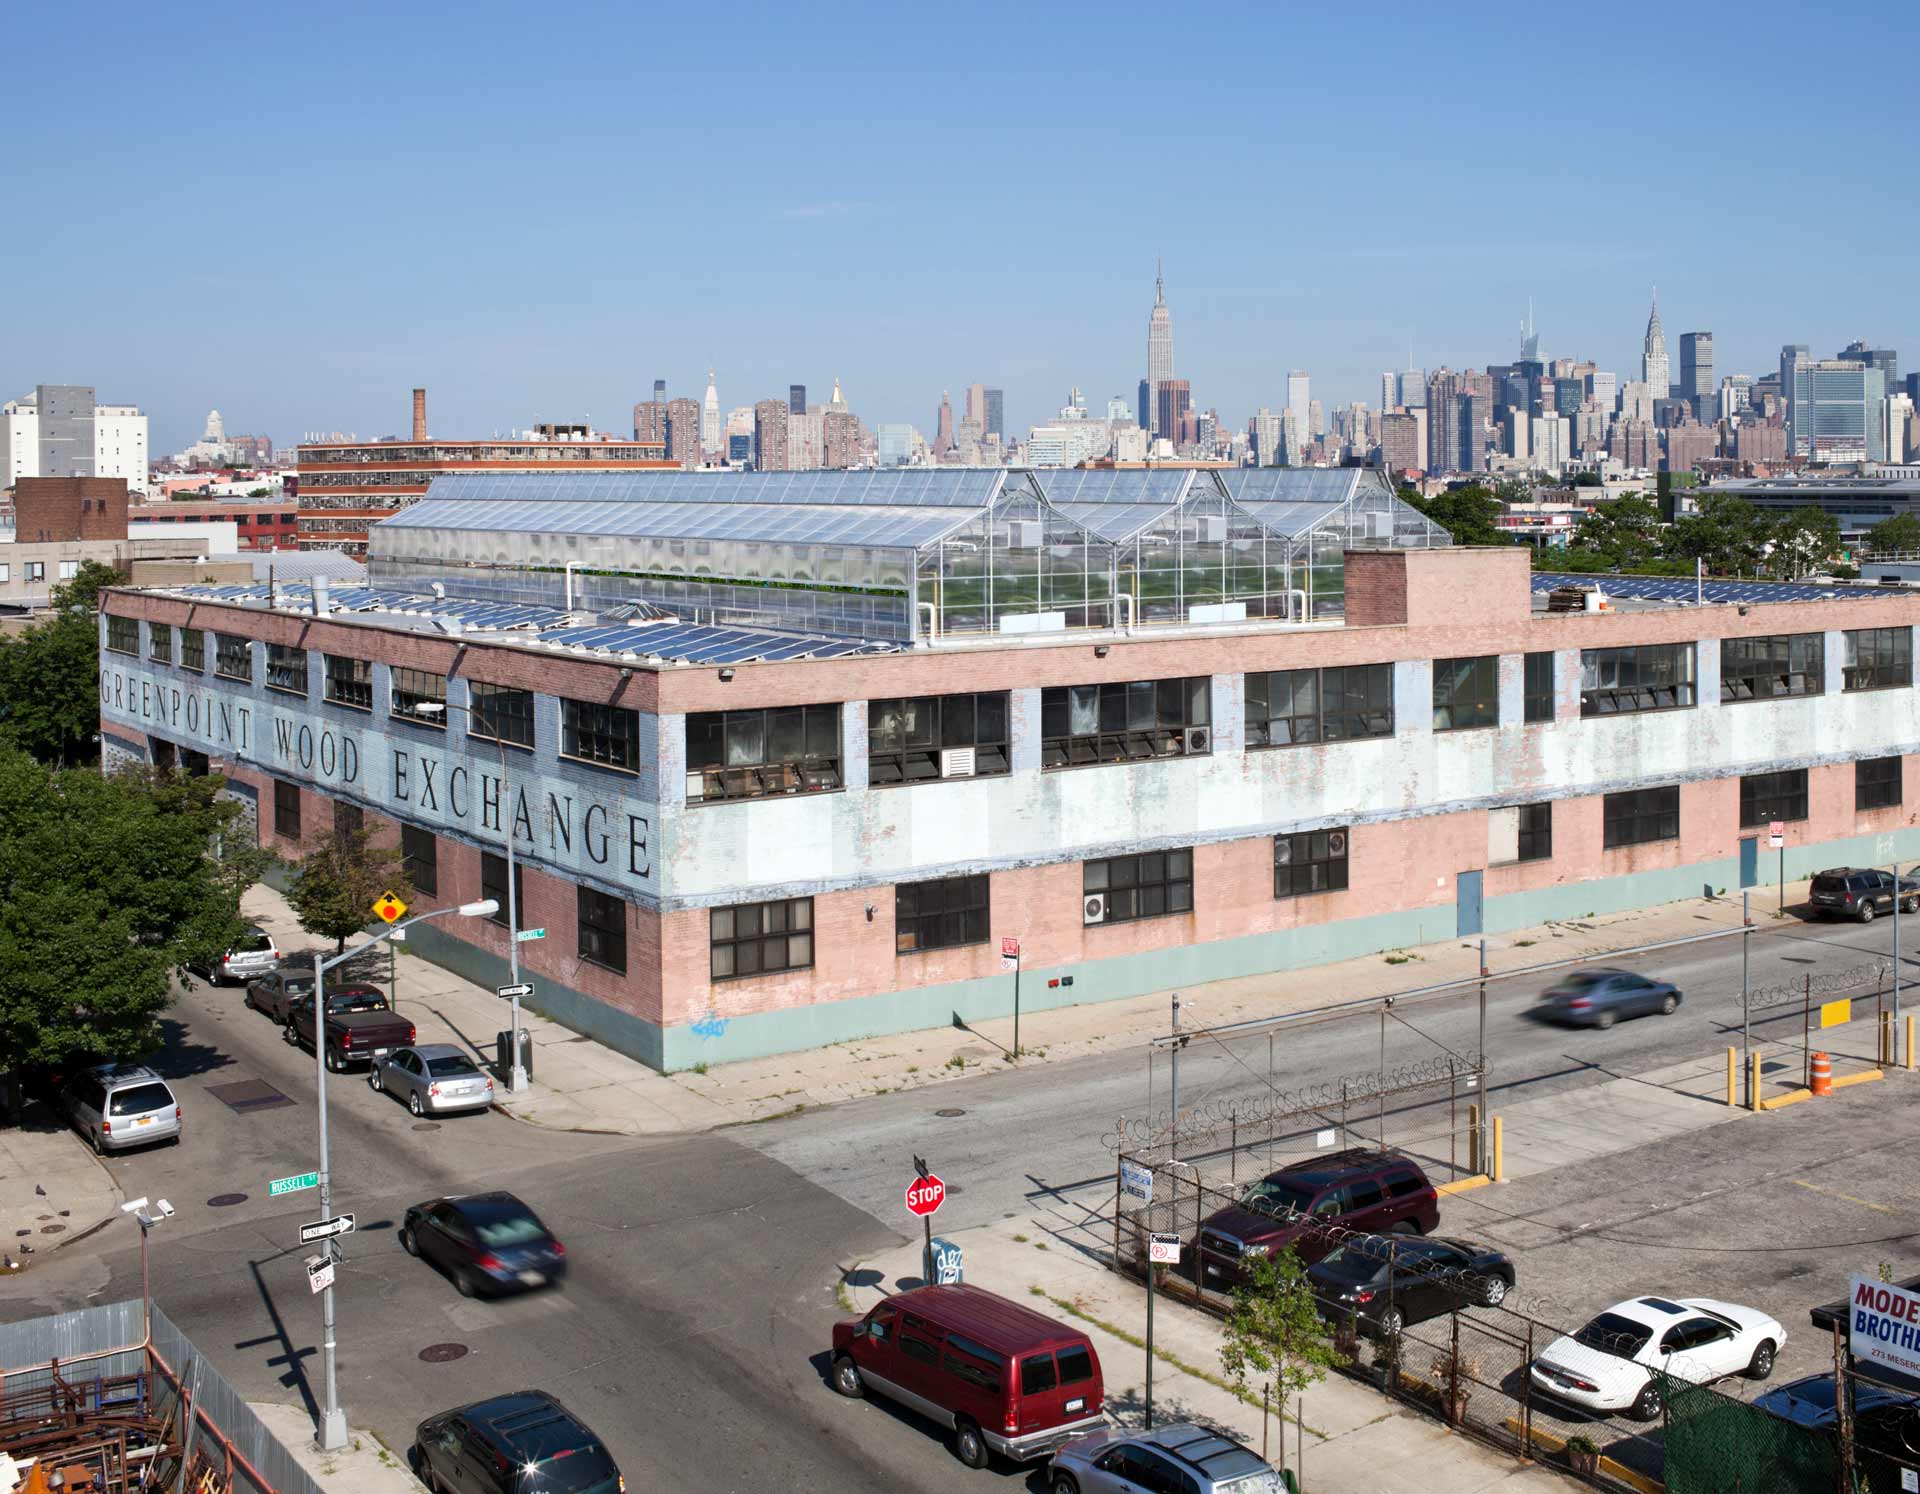 You Can Tour Gotham Greens' Indoor Rooftop Farm in Gowanus